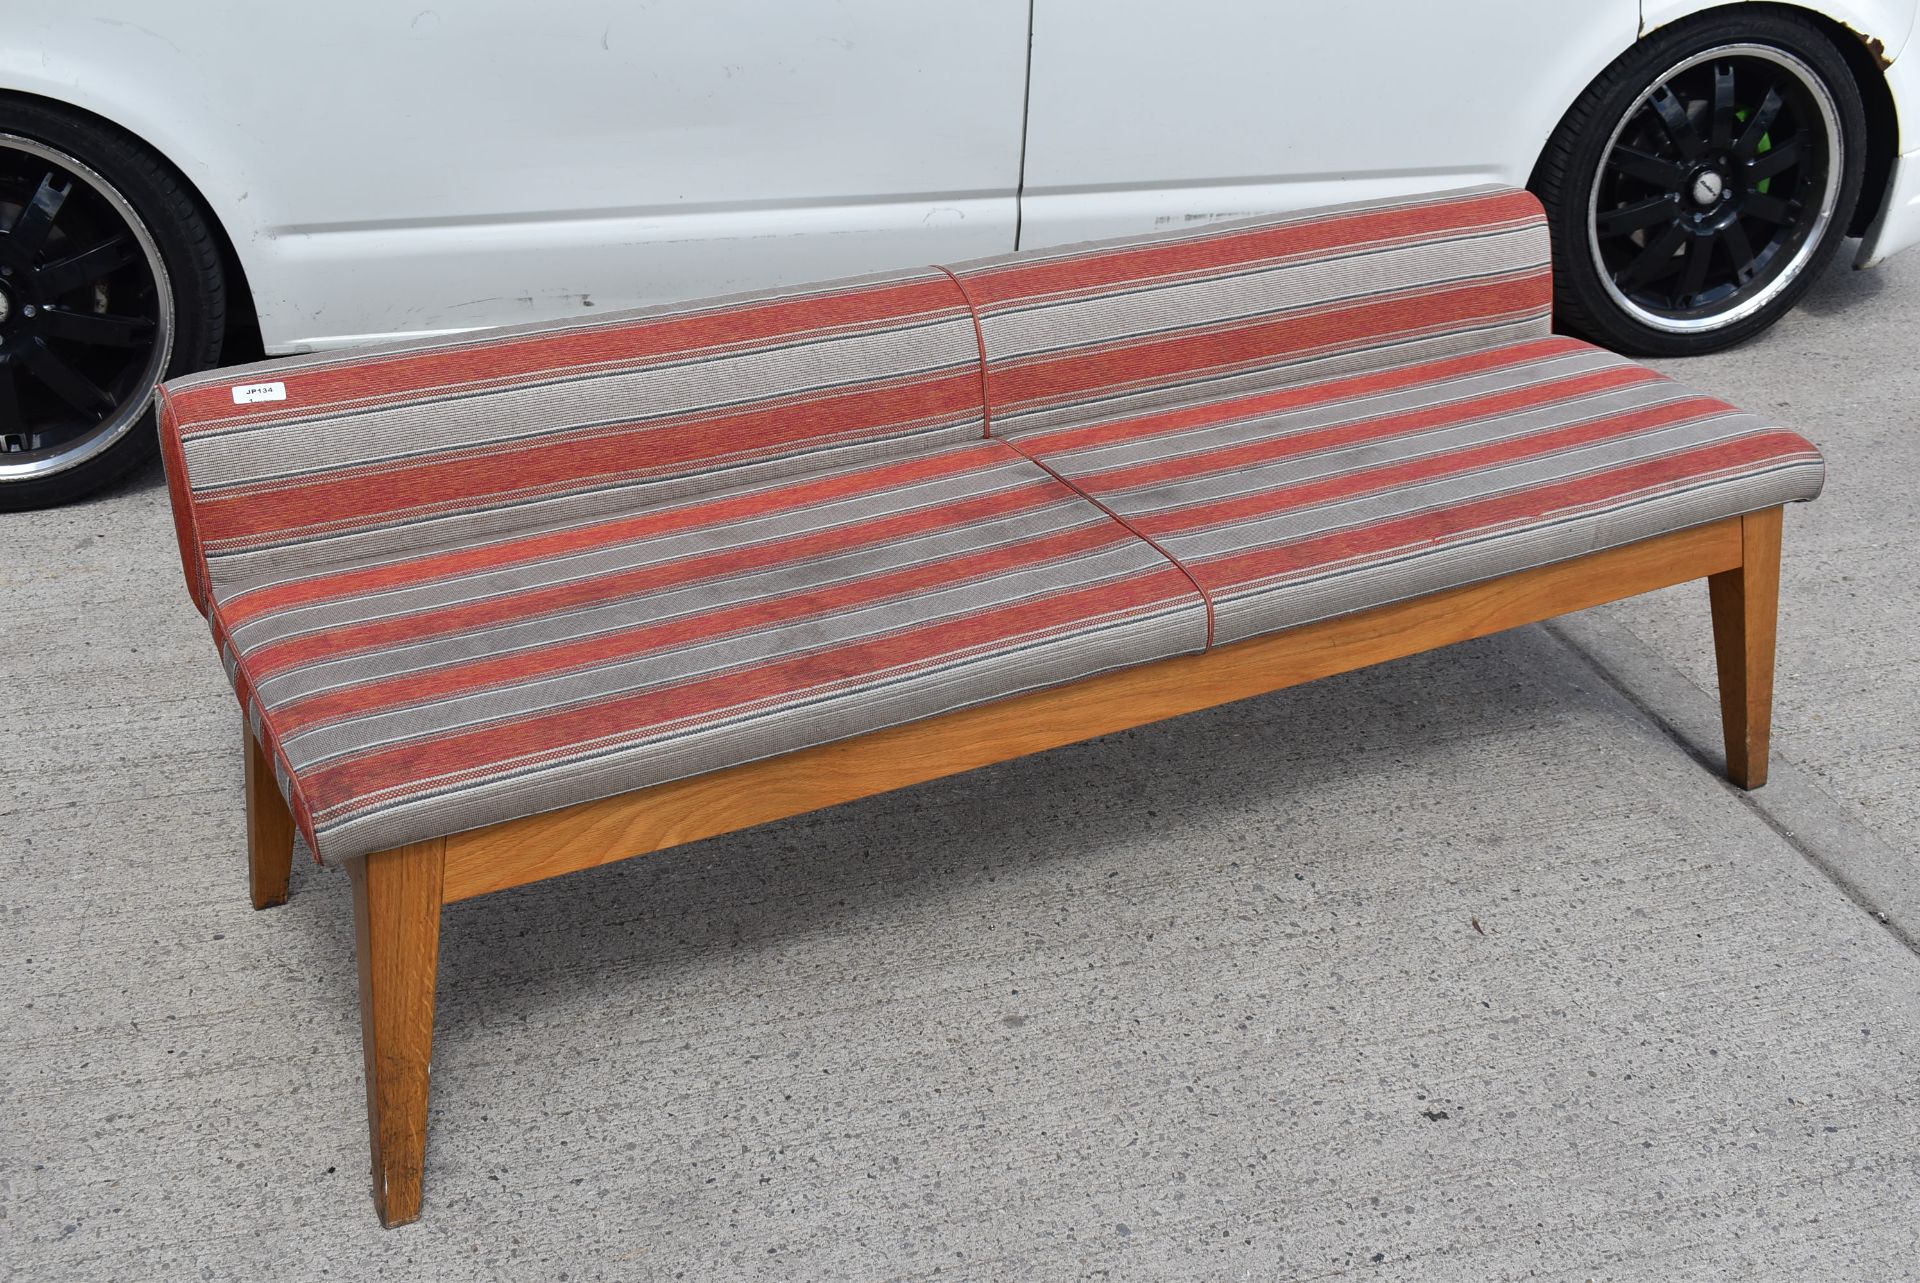 1 x Seating Bench With Solid Wood Bases and Hard Wearing Fabric Seats - Dimensions: H x W x D - Image 3 of 7